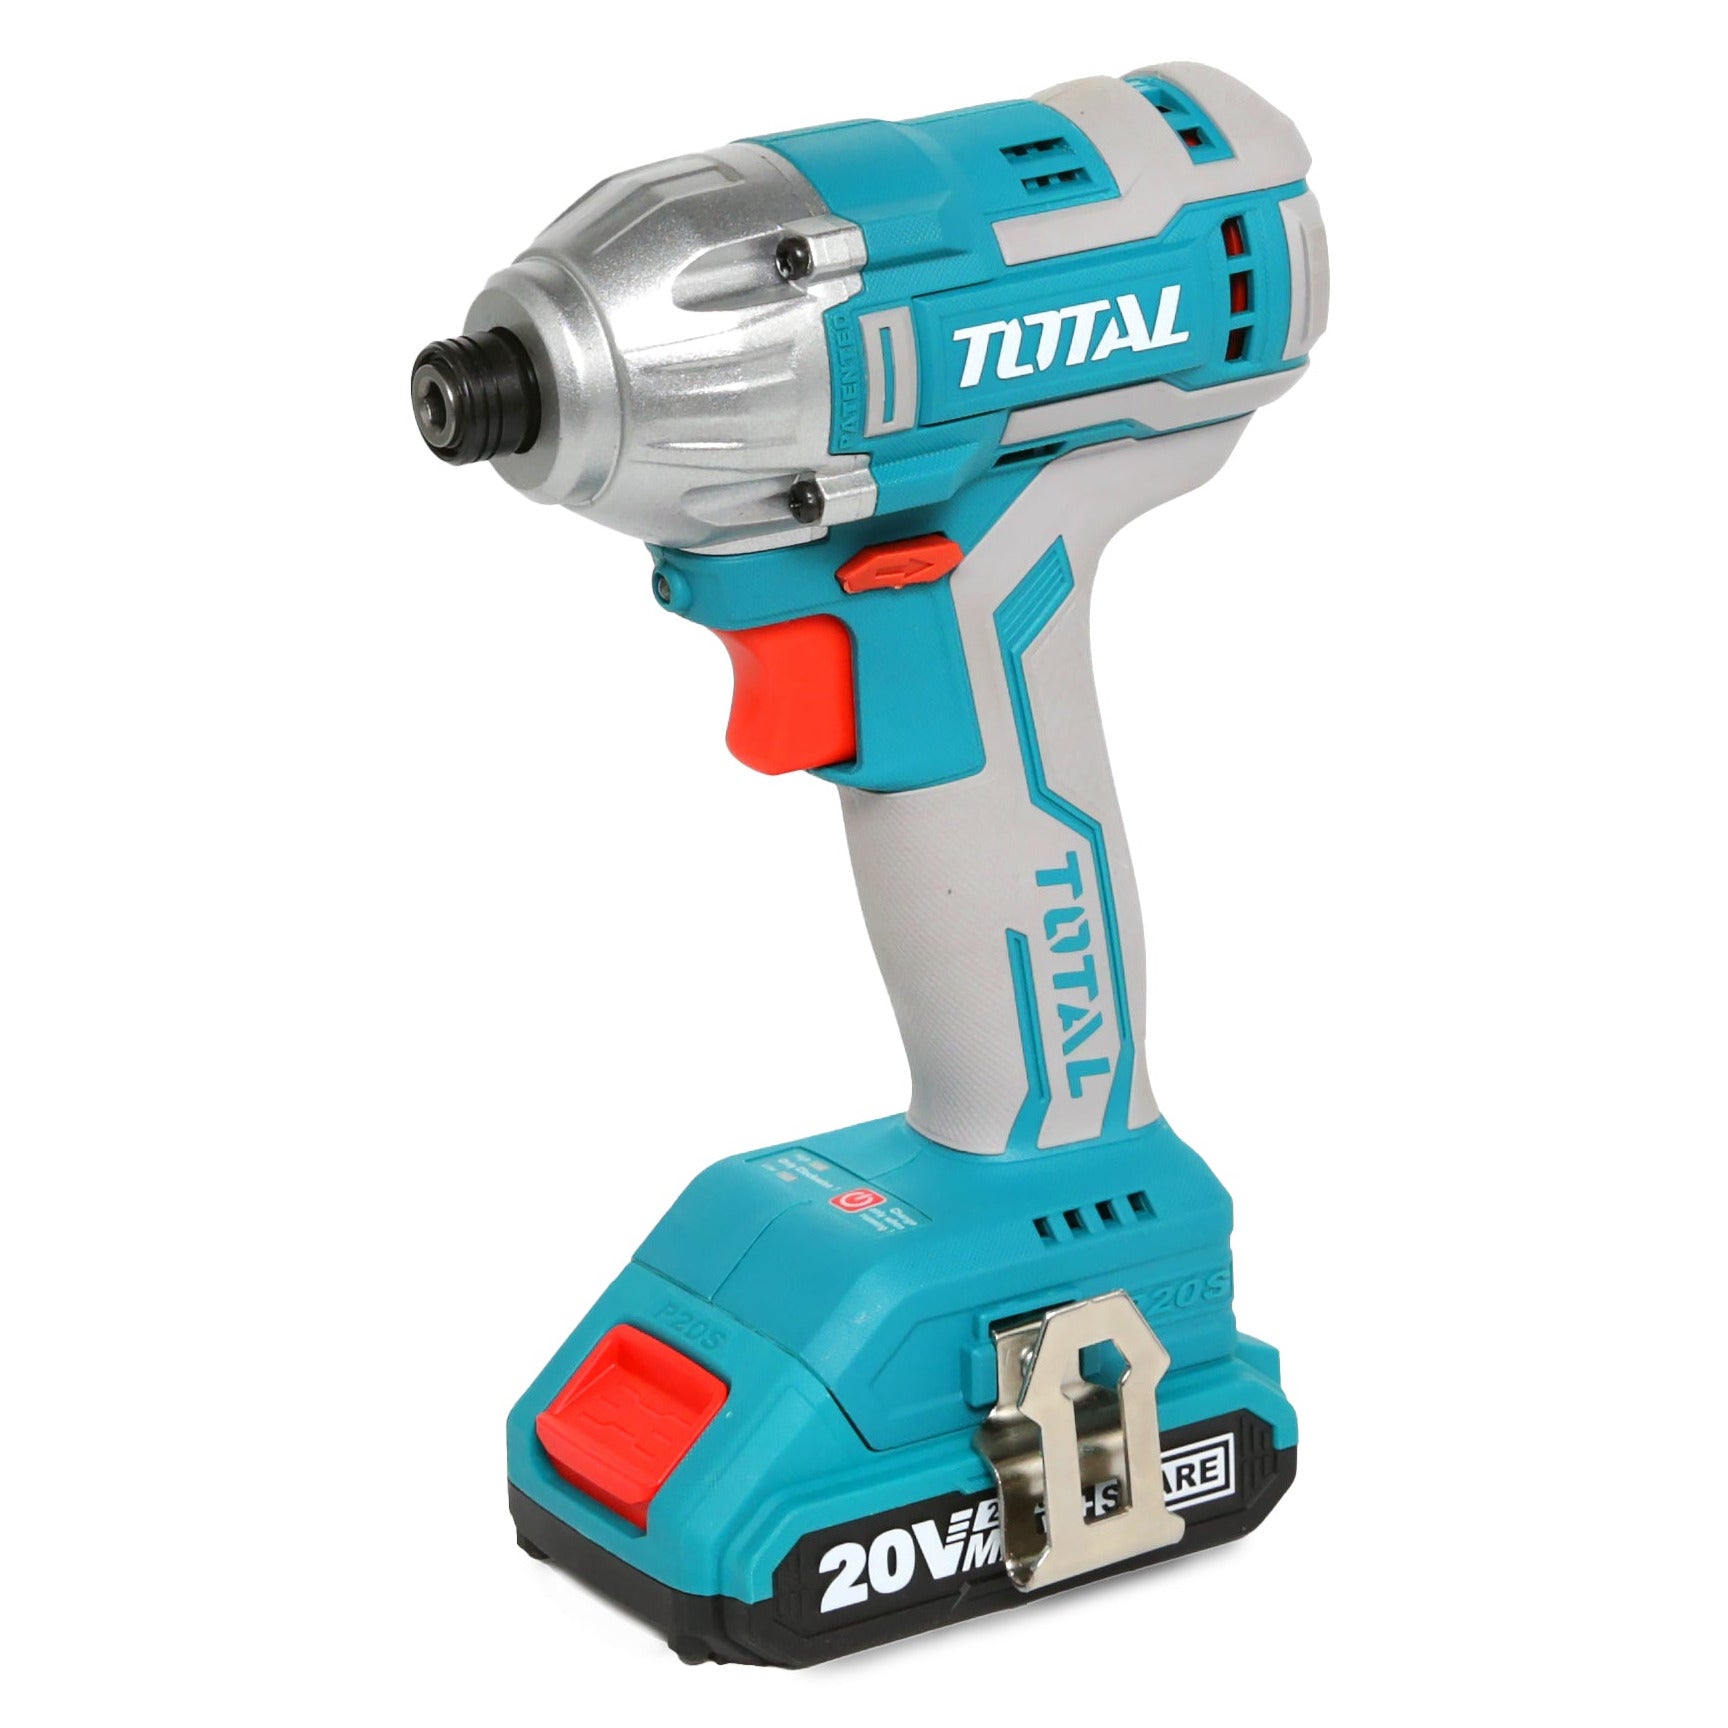 Total Li-Ion 20V Impact Driver (with 2 x Batteries & Charger) - TIRLI2002